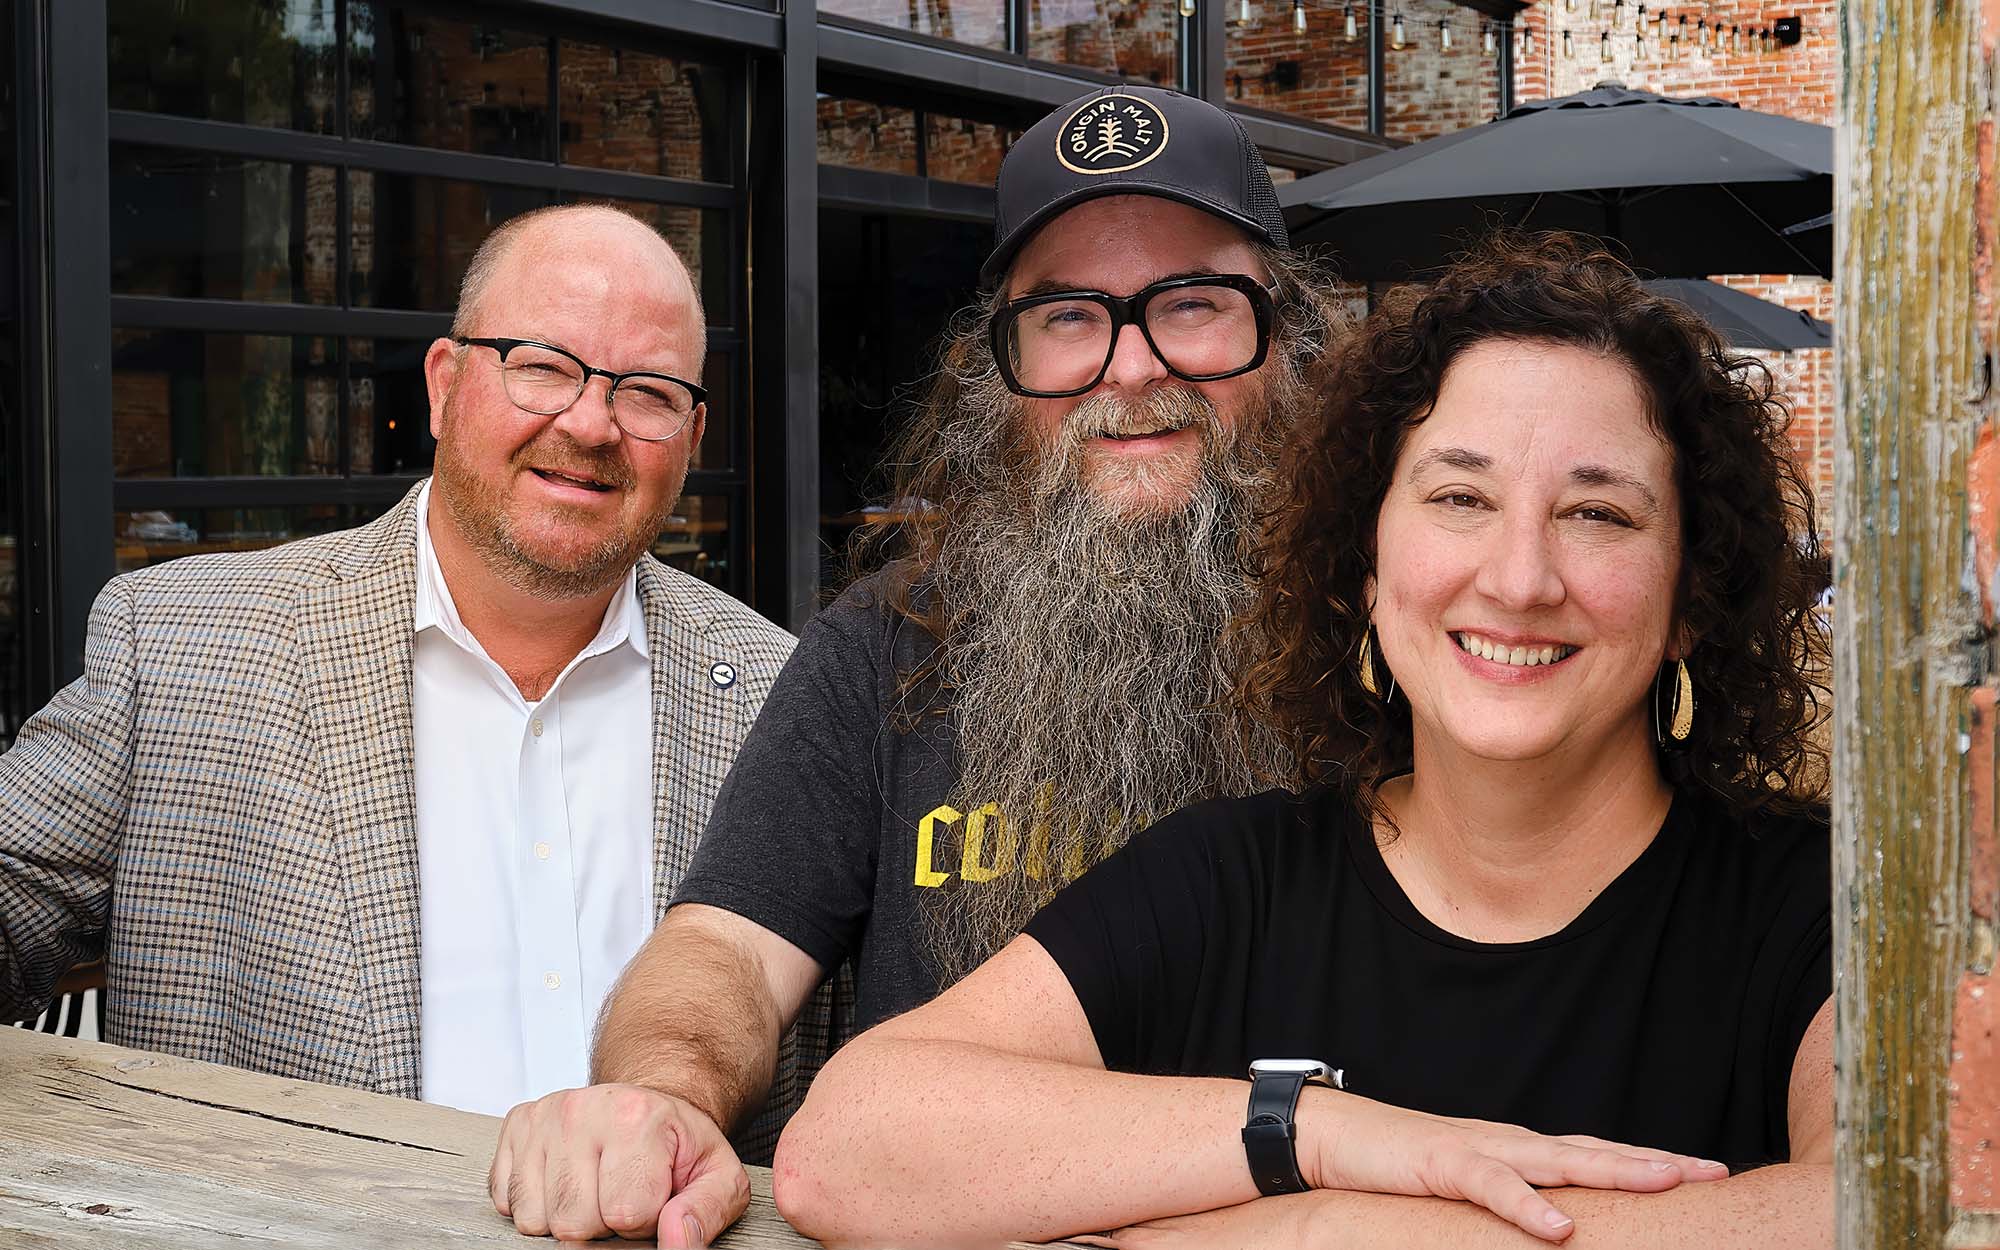 Heartland Bank chairman, president and CEO Scott McComb with clients Eric and Beth Bean, co-owners of Columbus Brewing Company